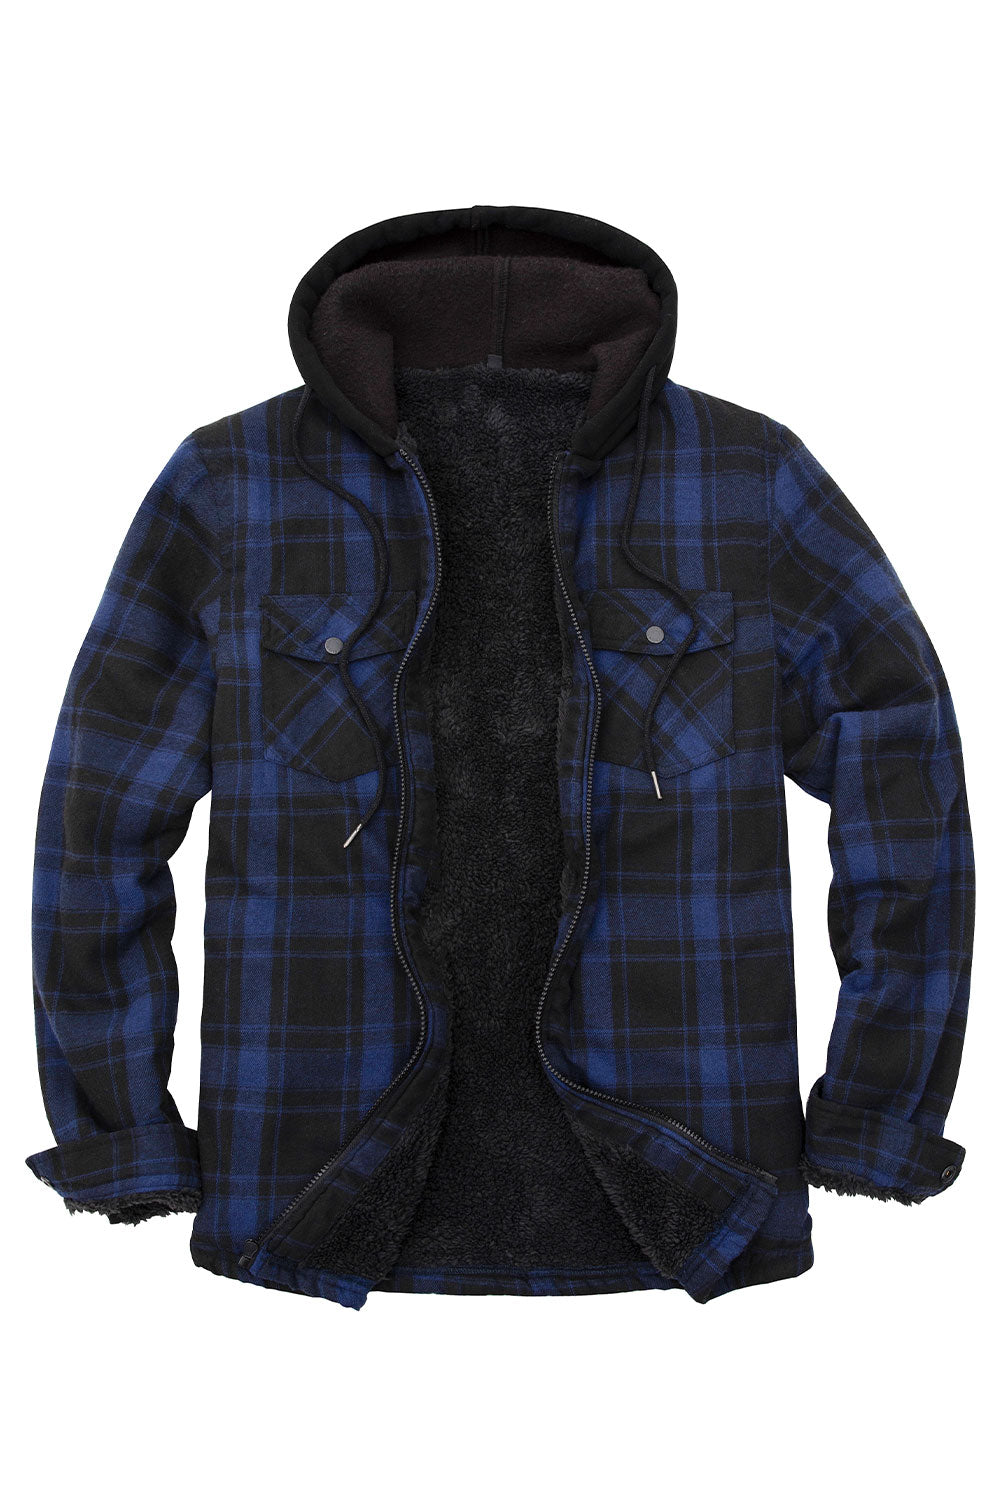 Men's Sherpa Lined Flannel Shirt Jacket with Hood,Plaid Shirt-Jac